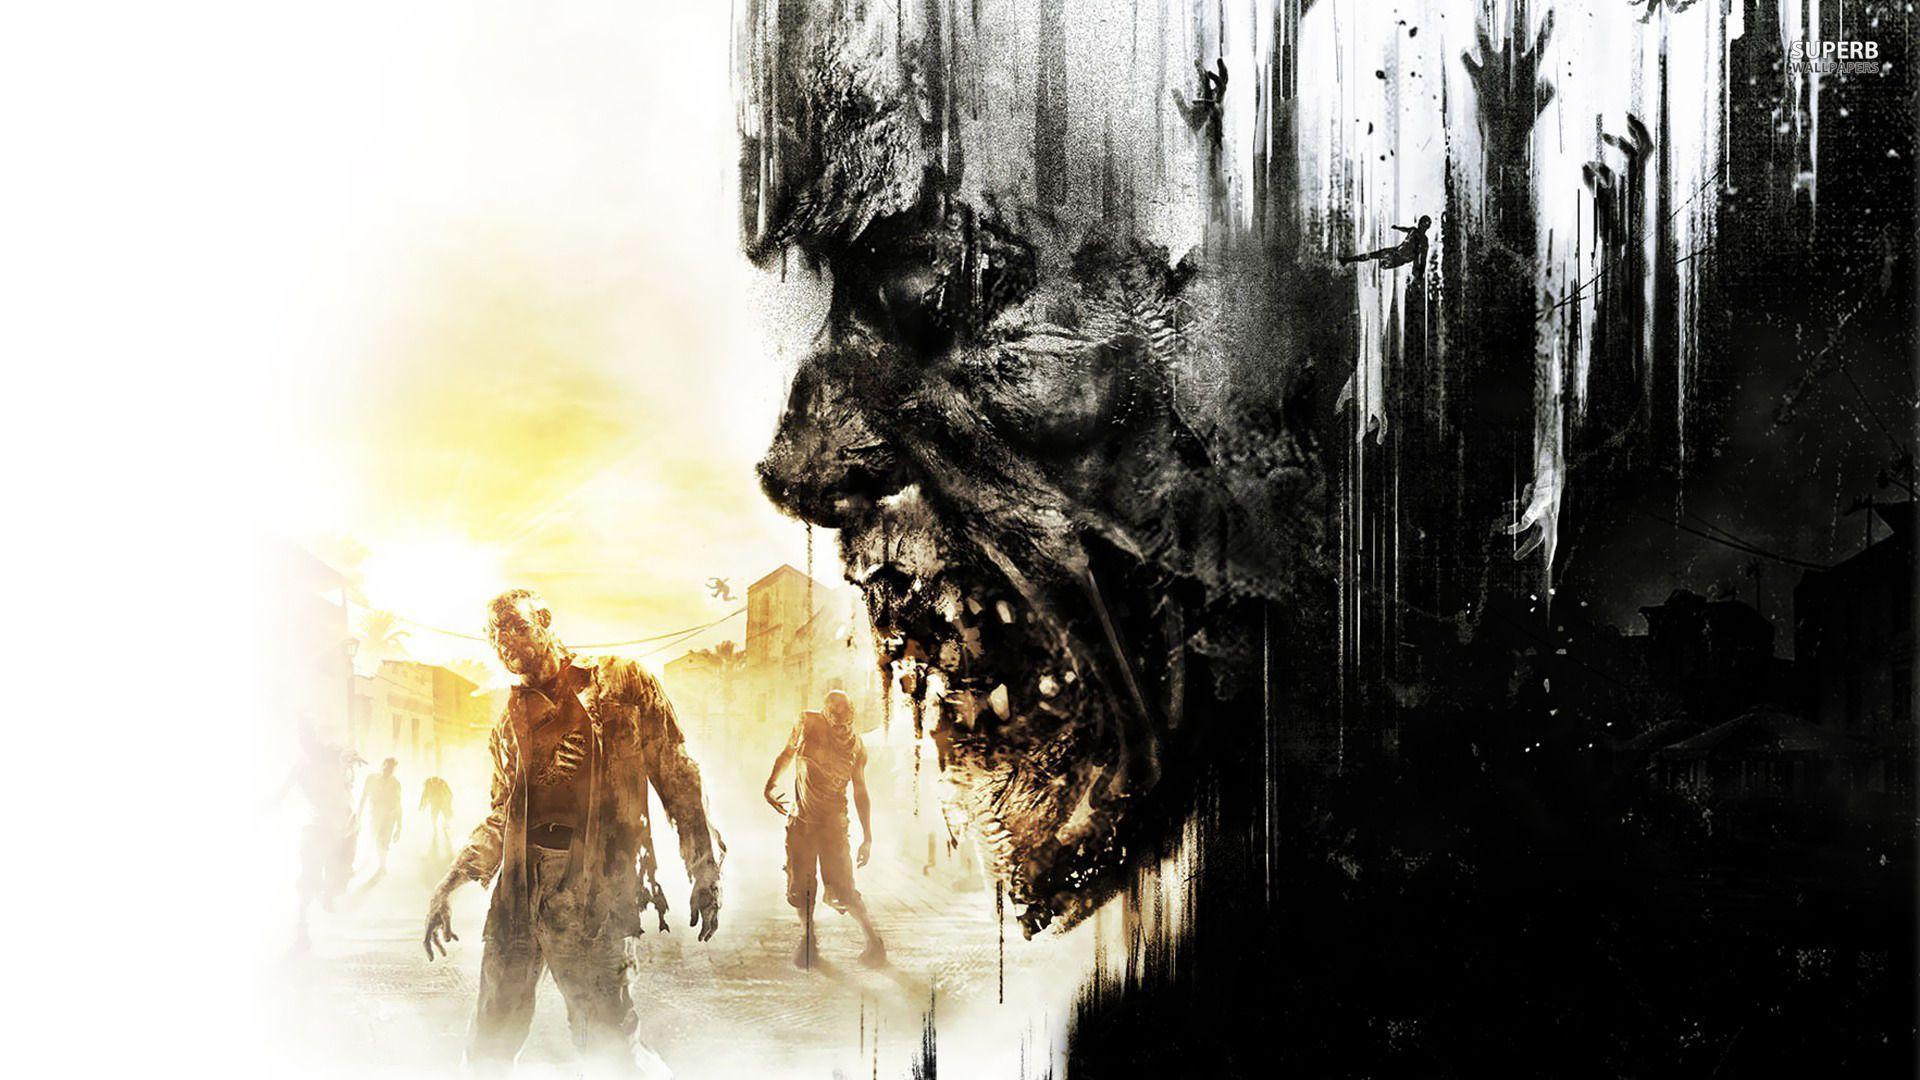 Dying Light Wallpapers